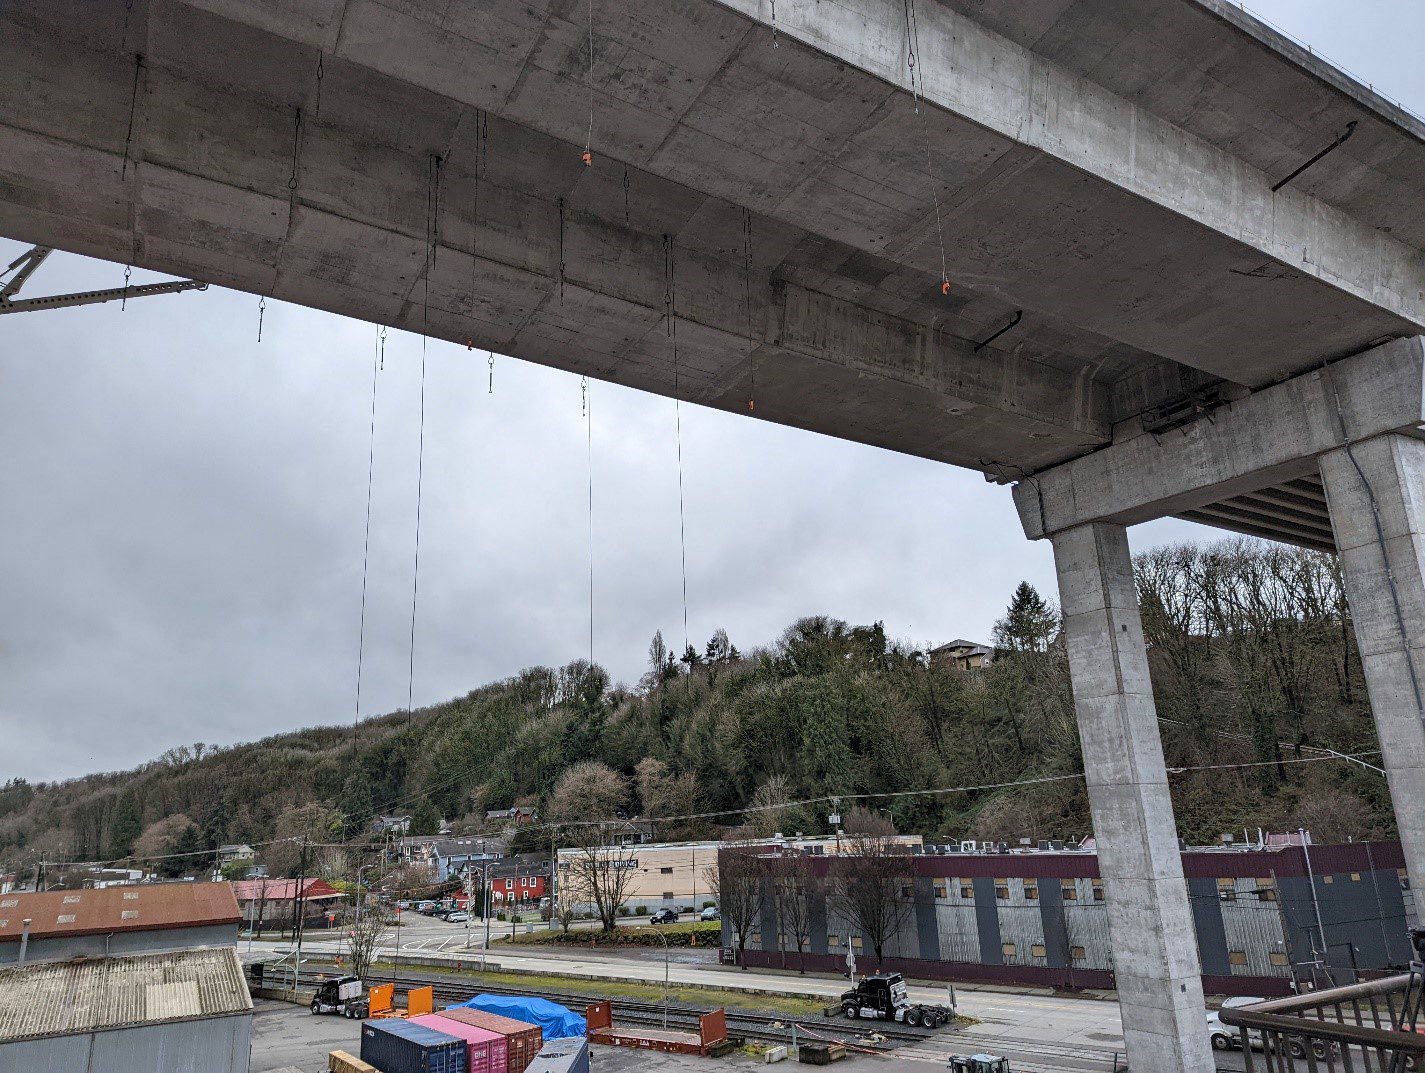 Rigging cables hang from the West Seattle Bridge. The work platforms are attached to these steel cables that will support the weight of the platforms as crews complete epoxy injections and carbon fiber wrapping on the exterior of the bridge.